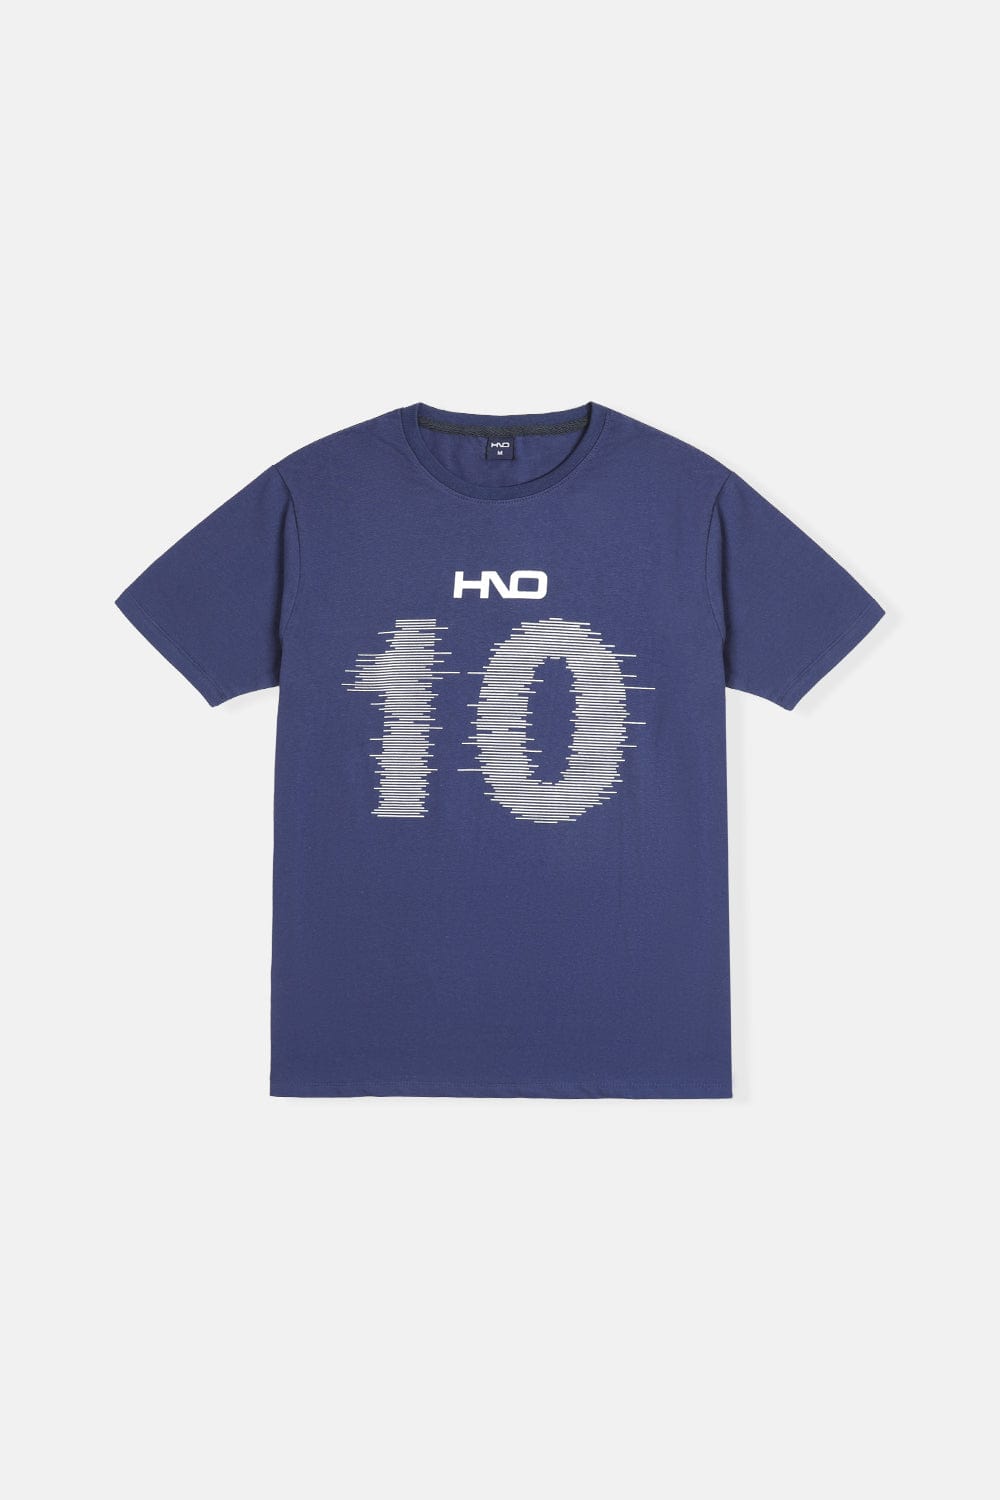 Hope Not Out by Shahid Afridi Men T-Shirt Men Blue Hno 10 T-Shirt